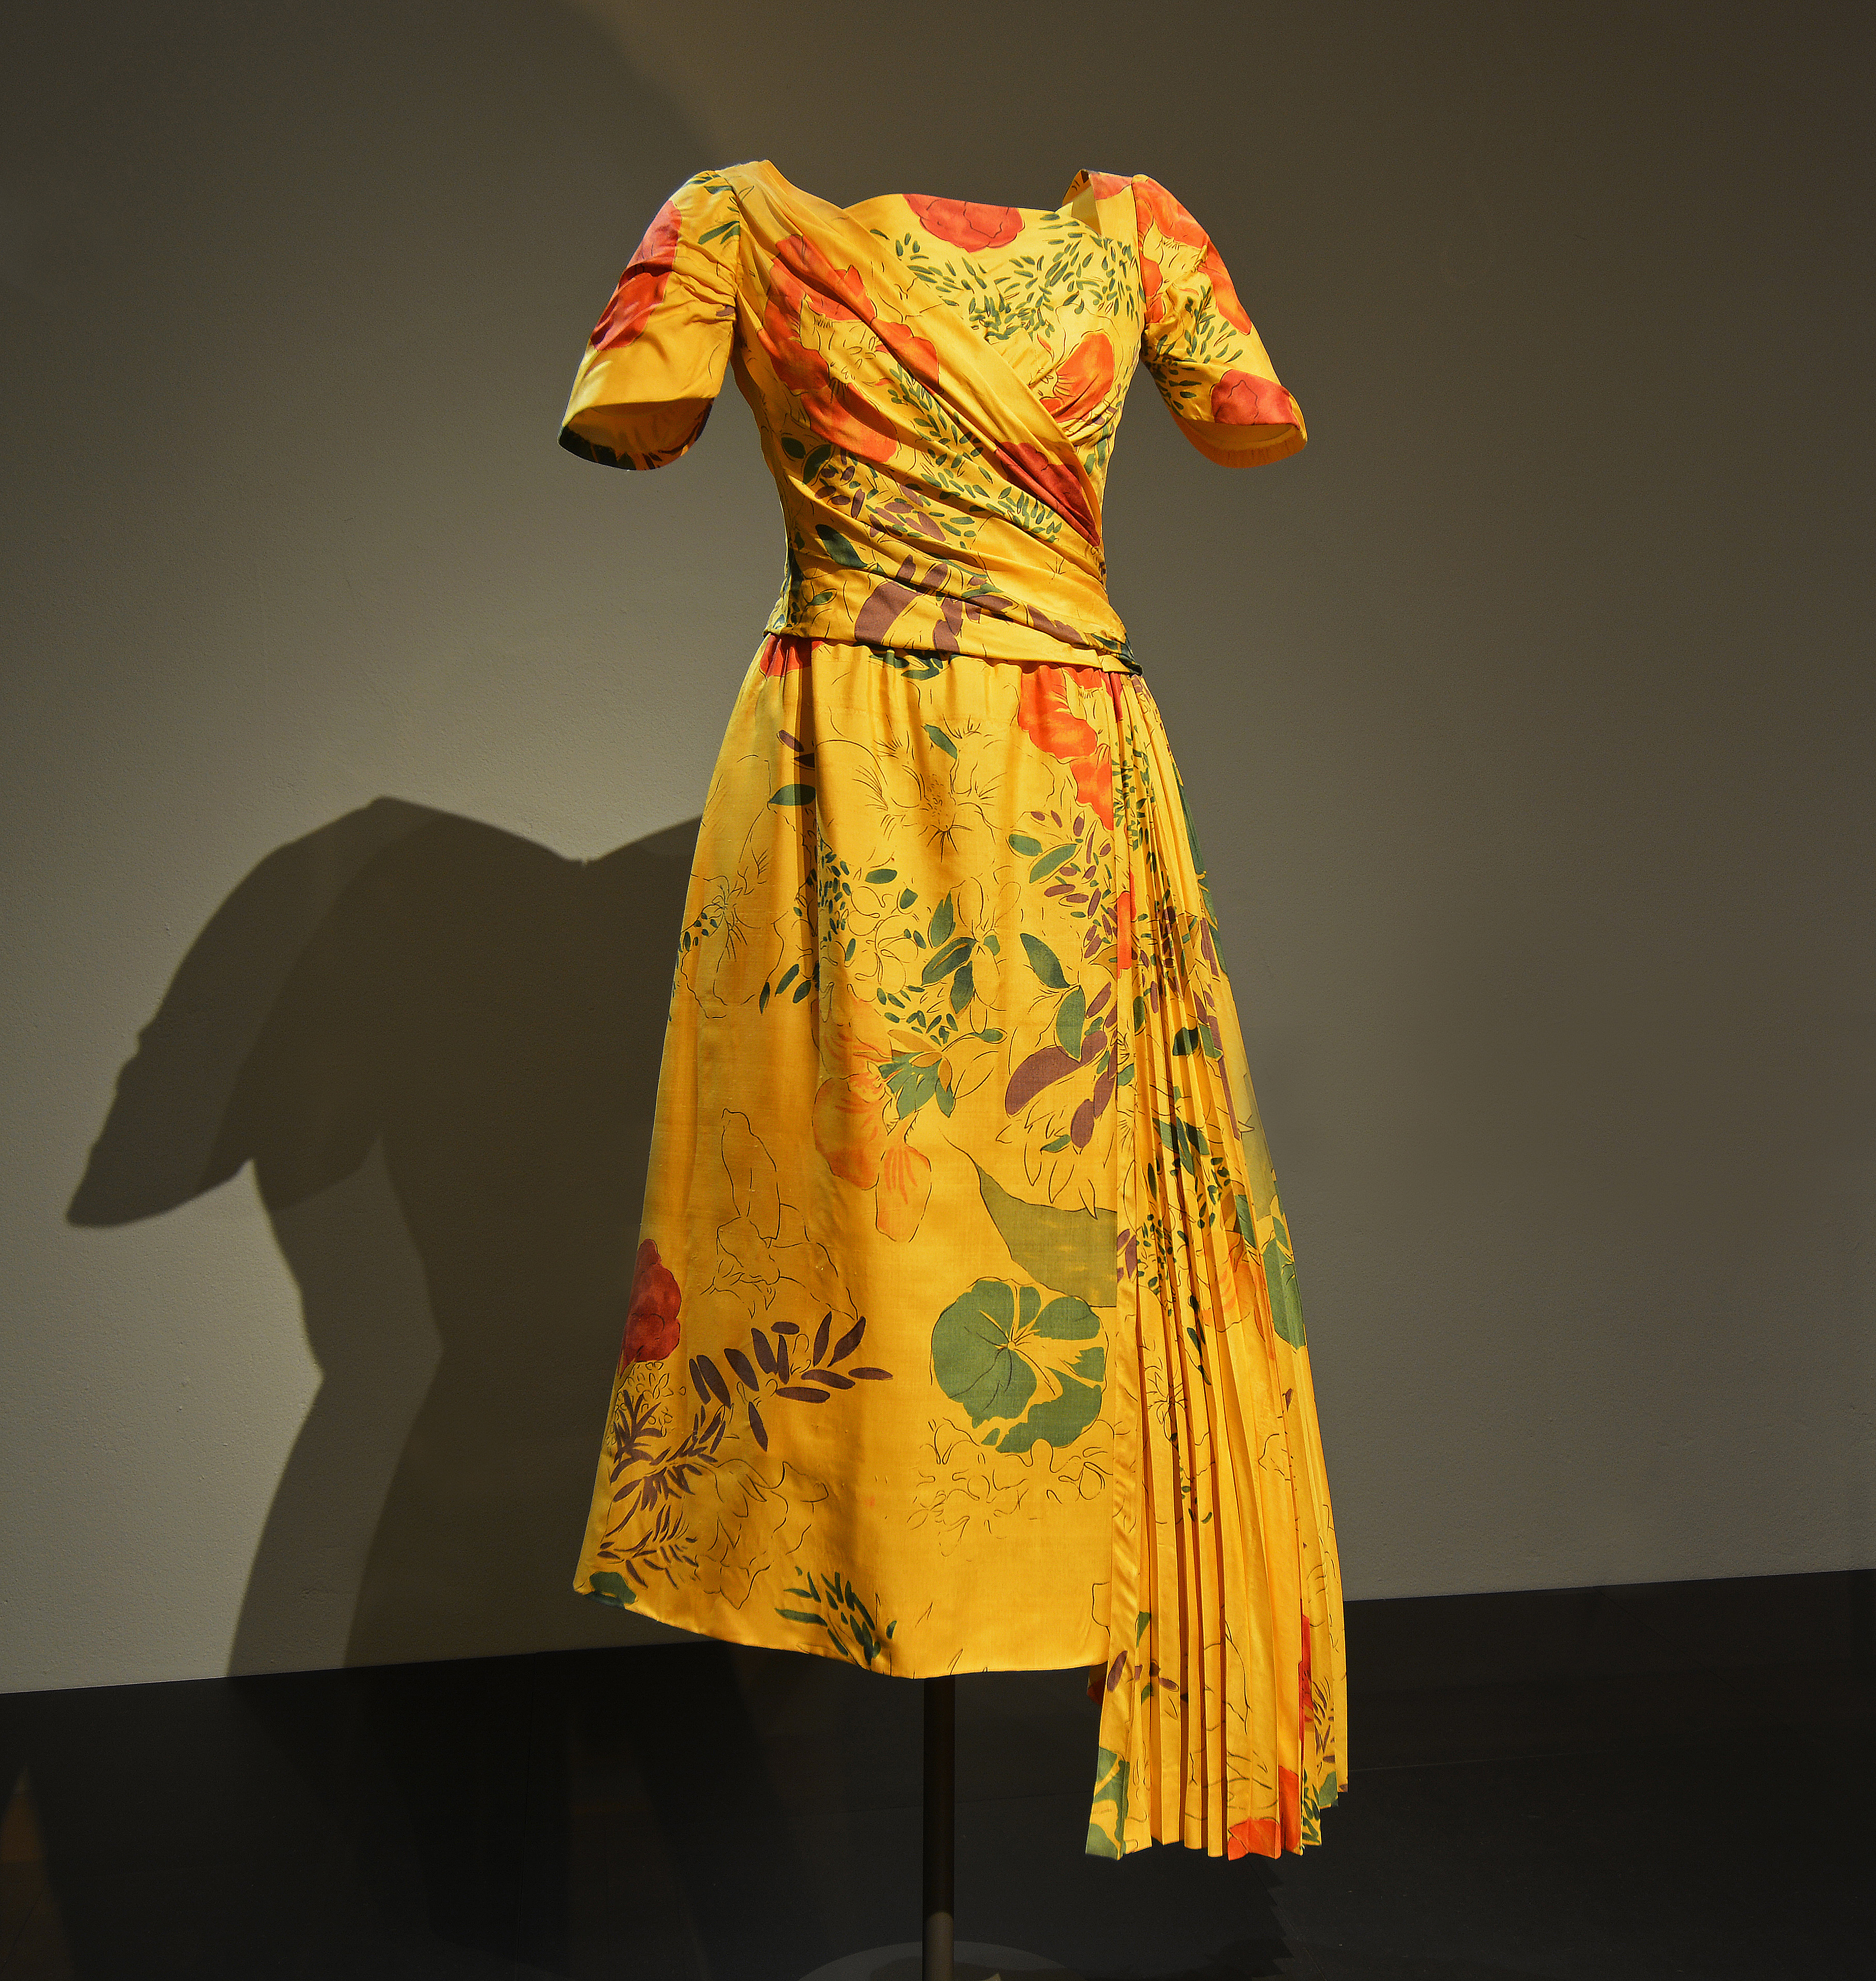 Big Dresses? No, Great Dresses! Now on display in Den Gamle By | Danish Life